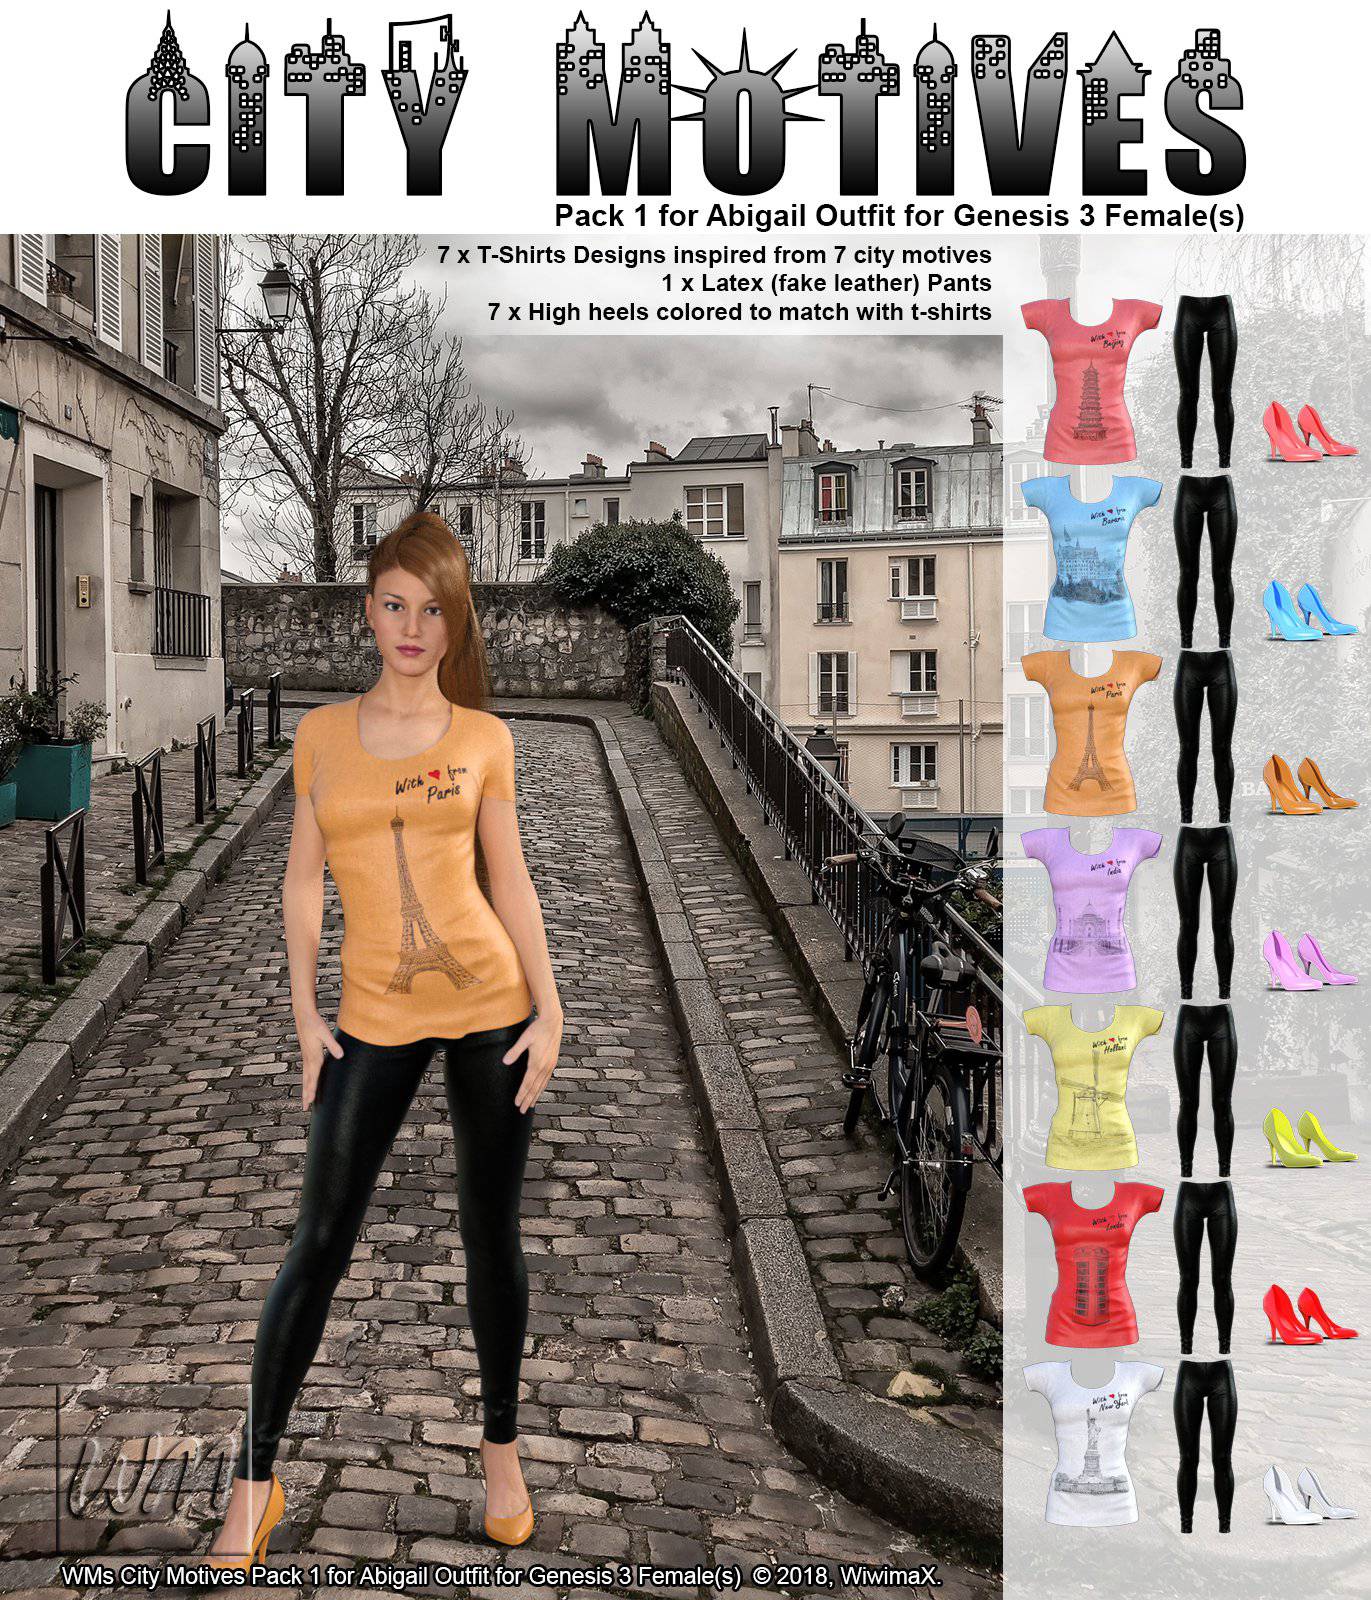 WMs City Motives Pack 1 for Abigail Outfit for Genesis 3 Females_DAZ3DDL